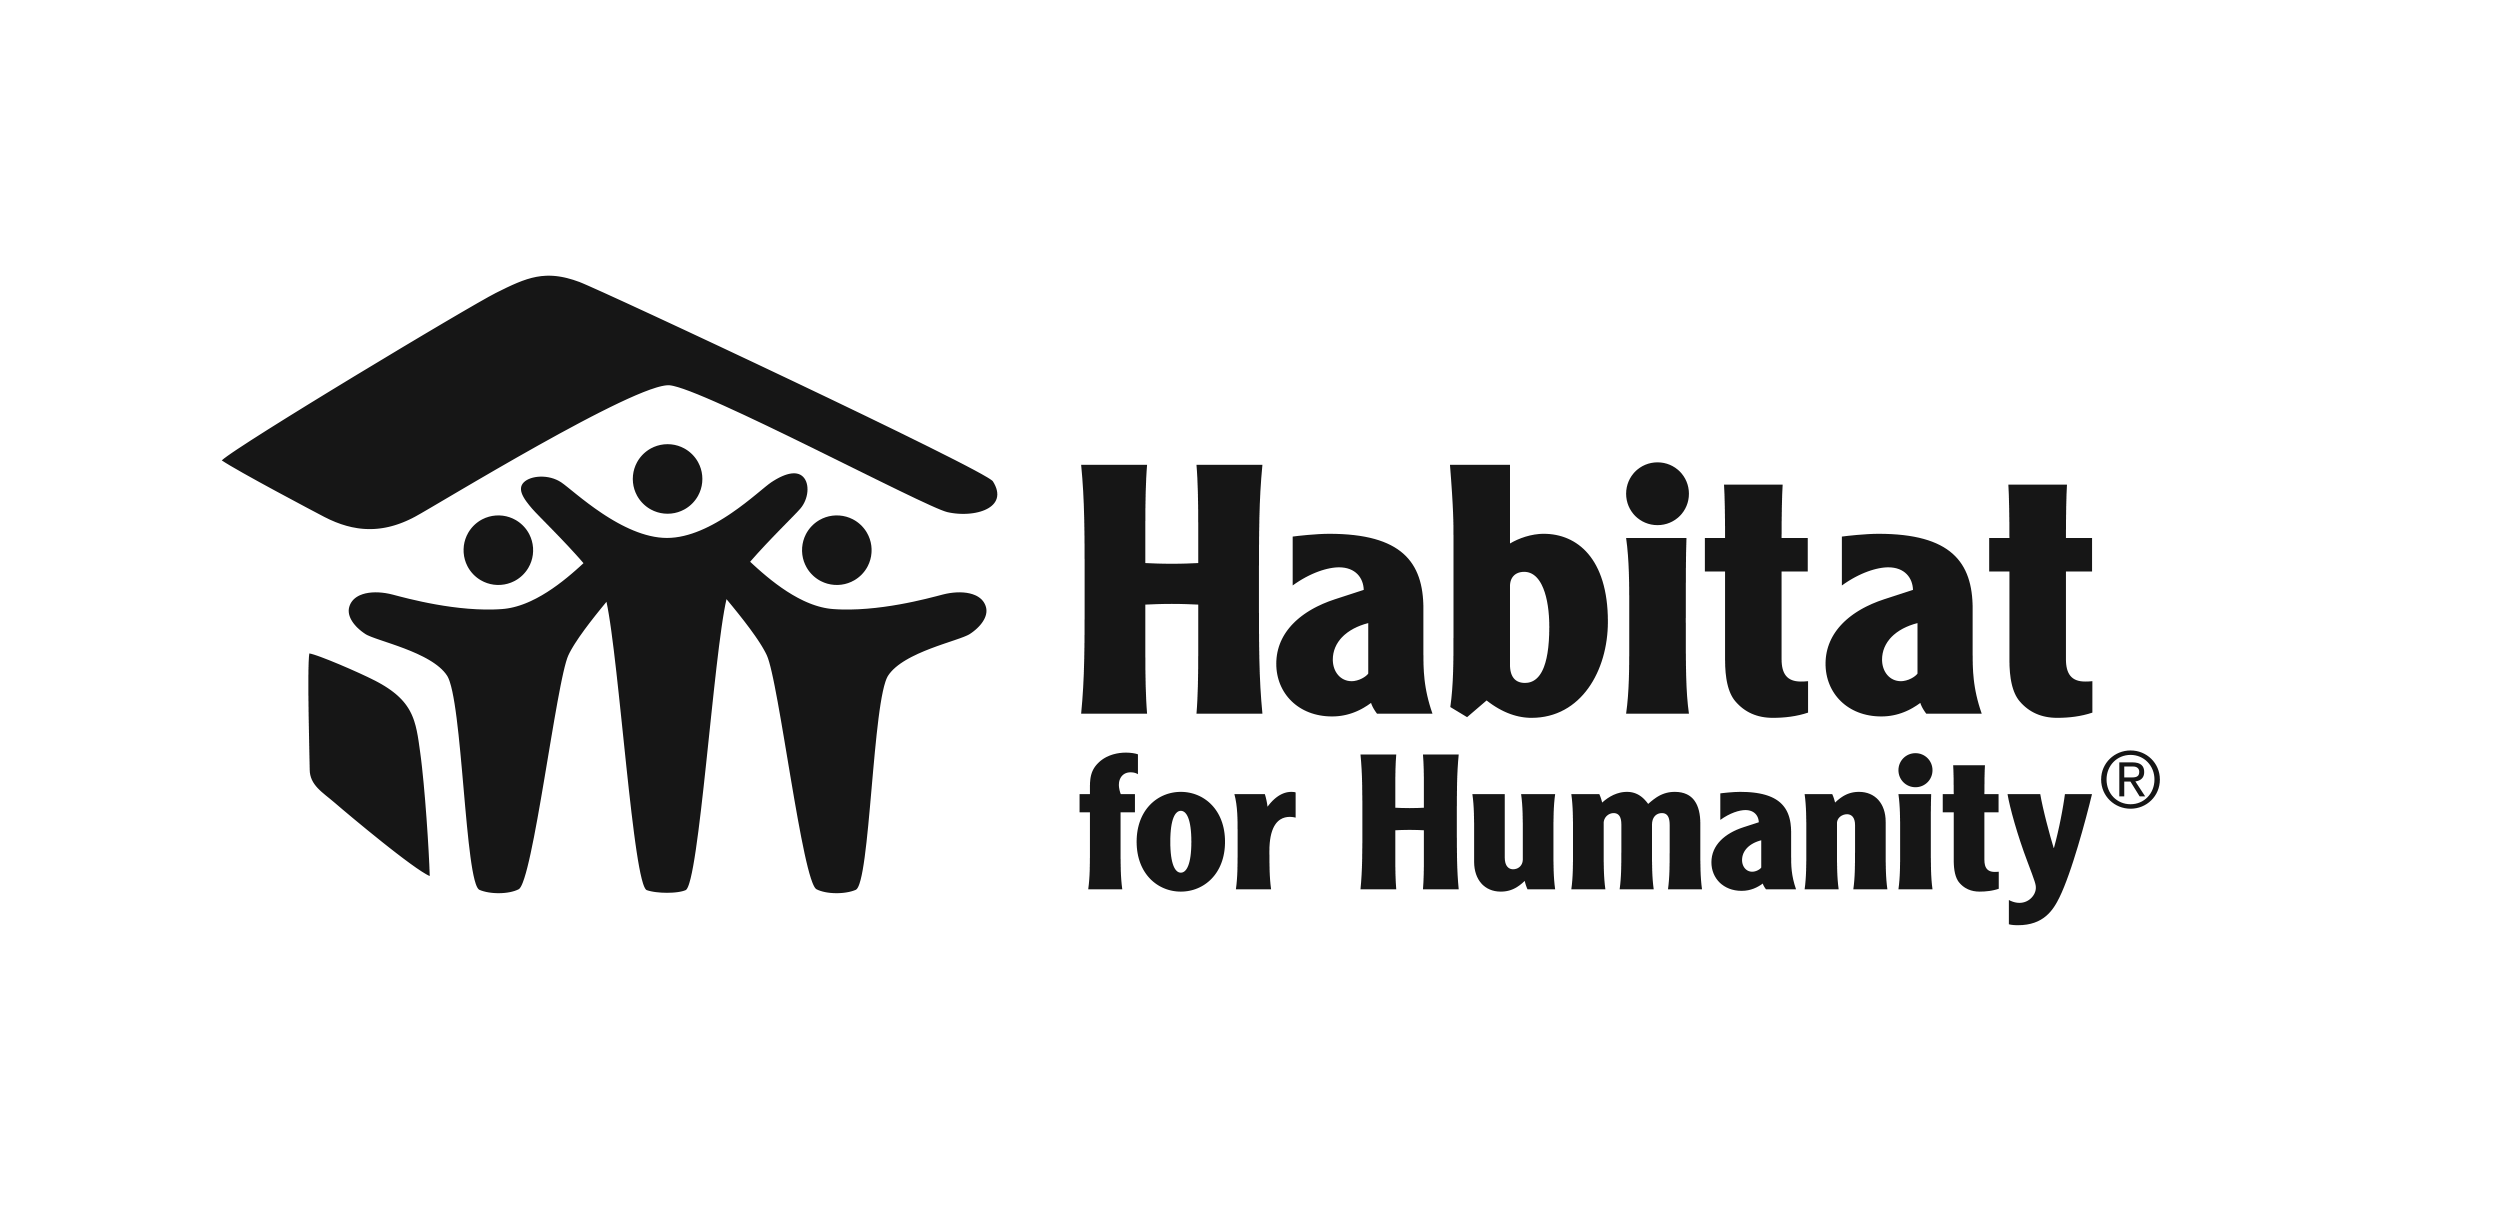 CSRWire - Chico's FAS Announces National Partnership With Habitat for  Humanity